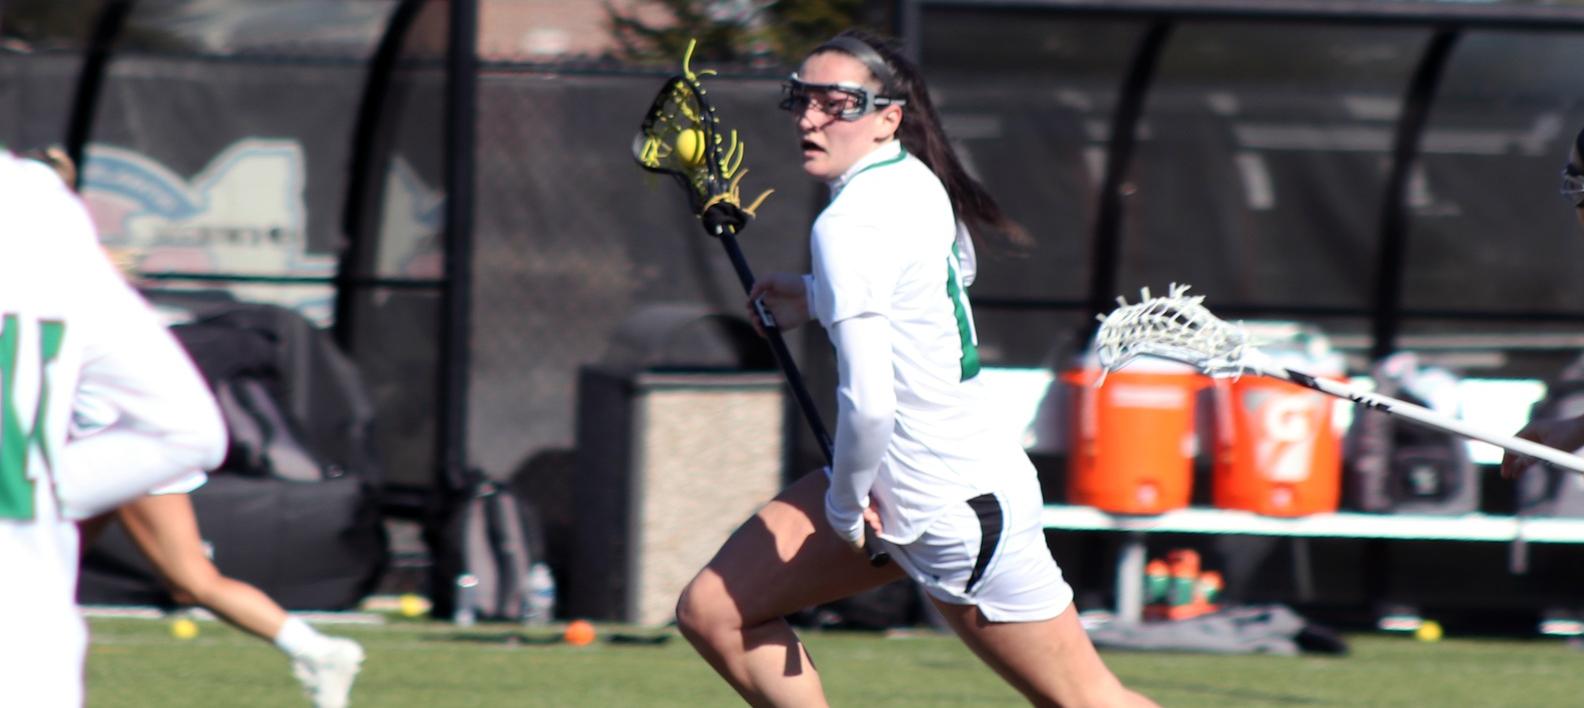 File photo of Brooke Siebert who finished with 3 G, 1 A, 5 GB, 7 DC, and 5 CT at Post. Copyright 2020. Wilmington University. All rights reserved. Photo by Laura Gil. February 22, 2020 vs. Millersville.